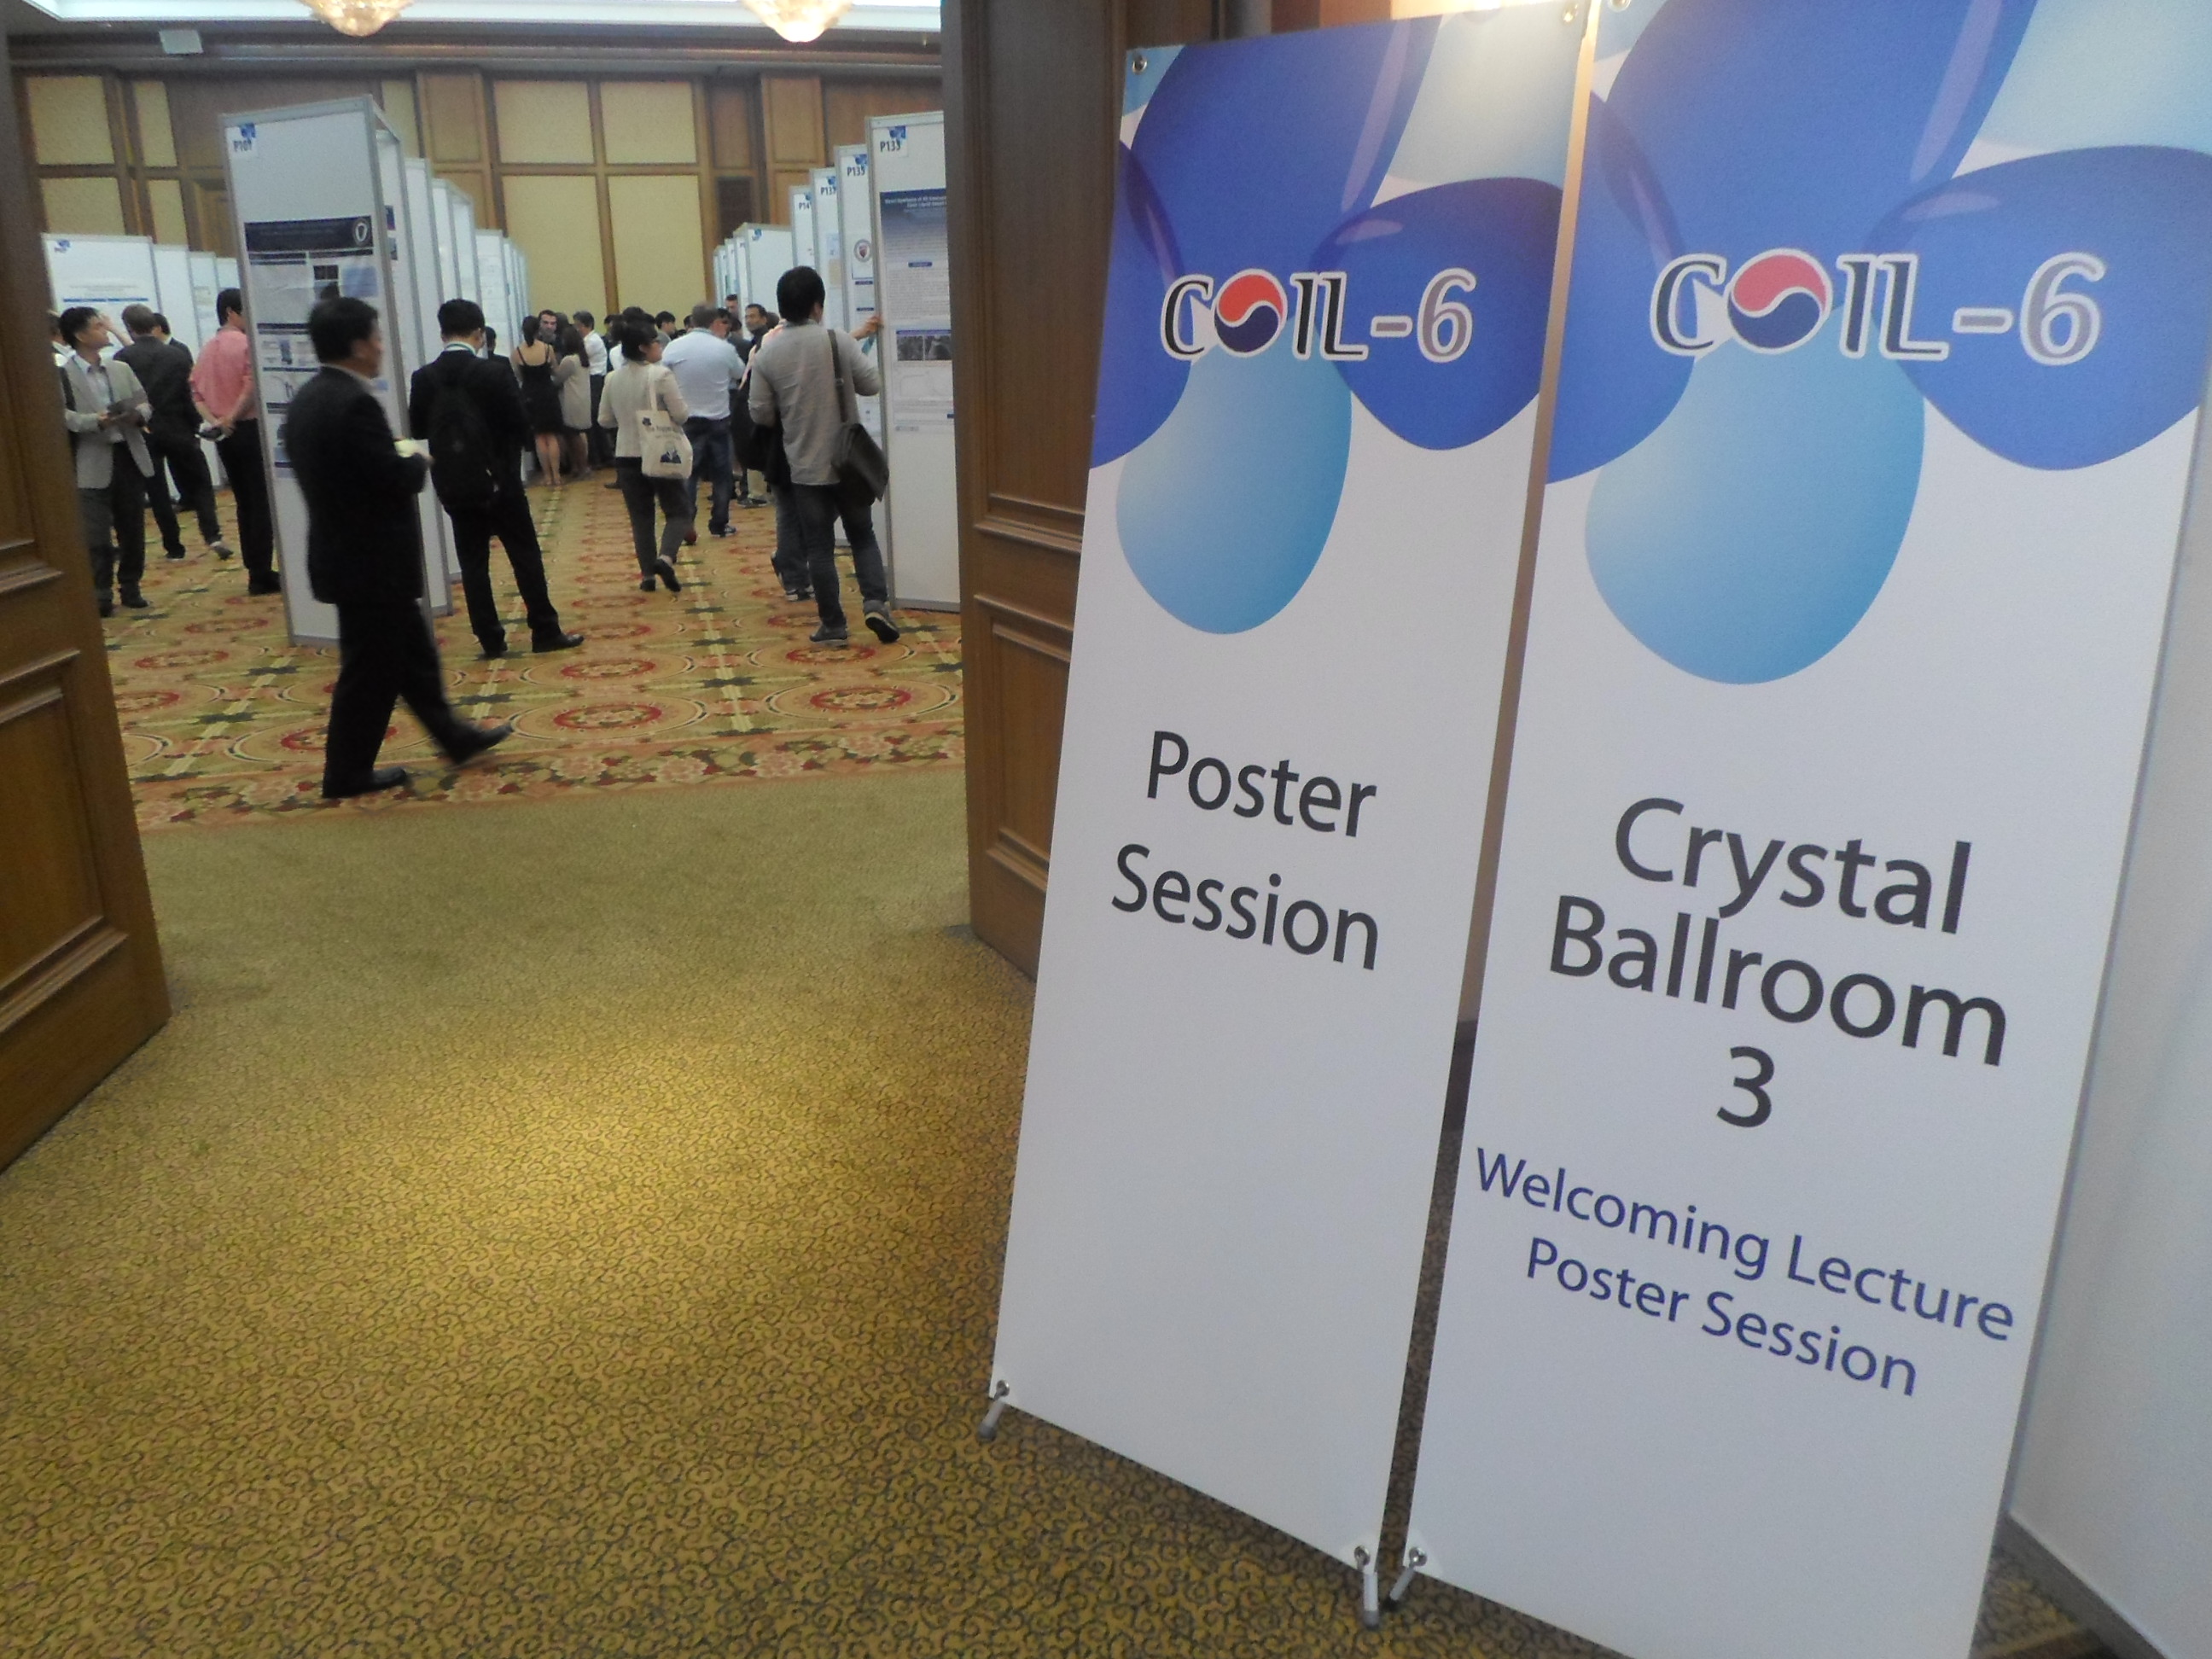 Day 18th - Poster Session